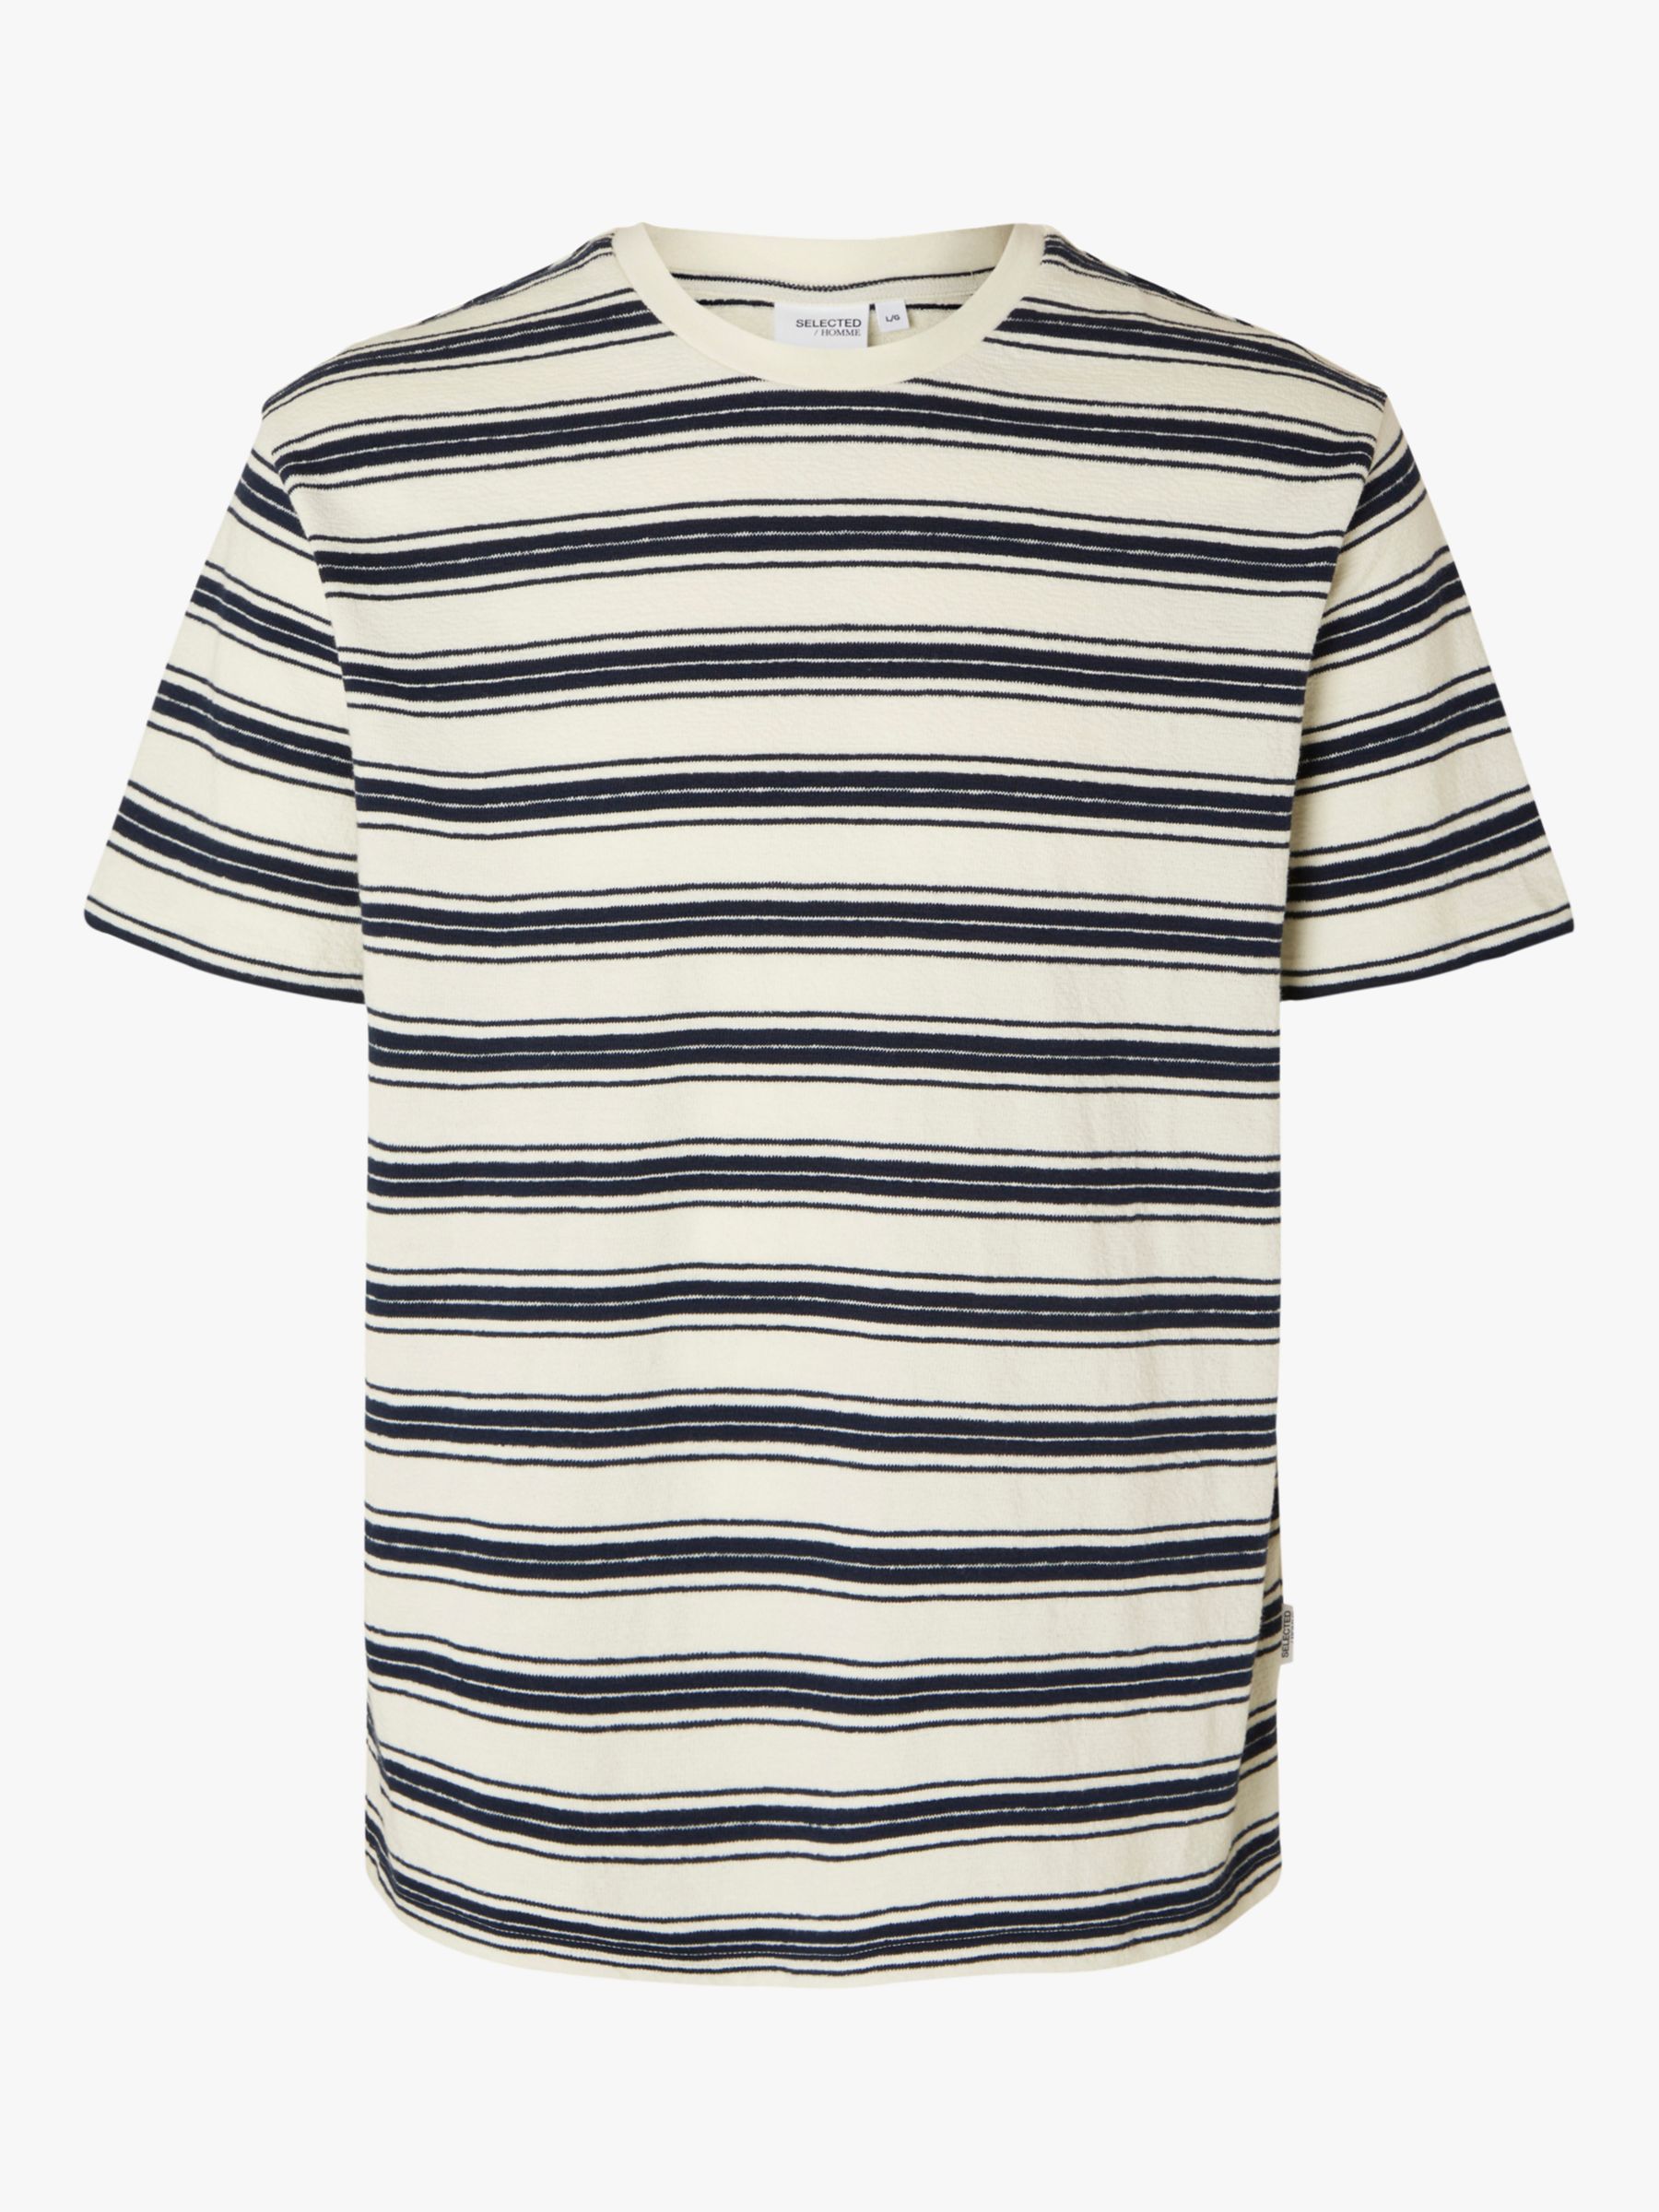 SELECTED HOMME Relaxed Crew T-Shirt, Blue/White, S